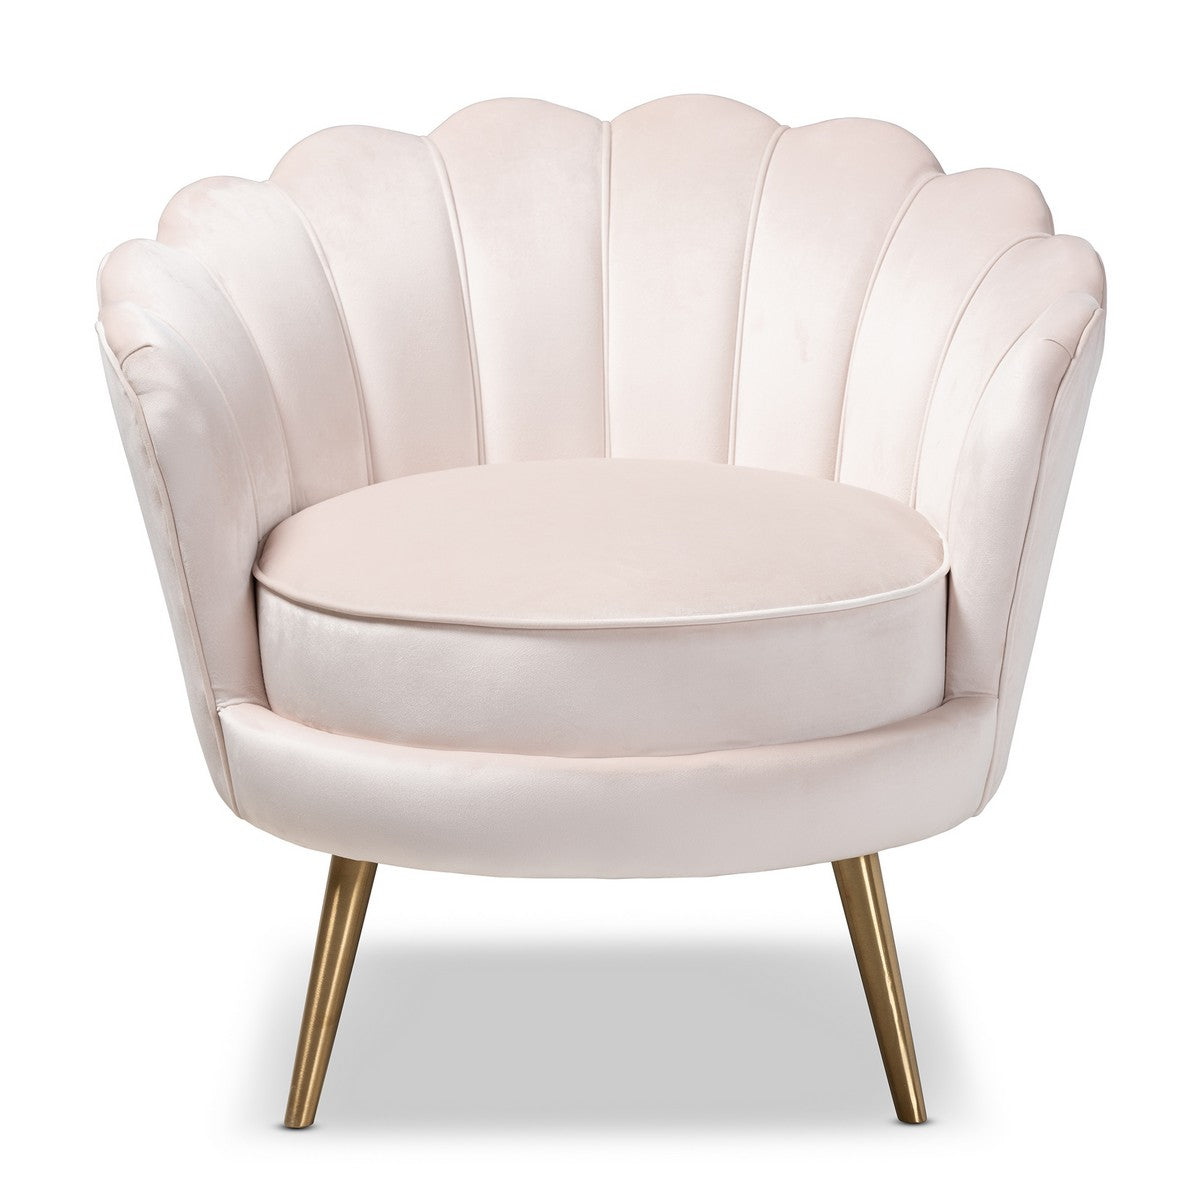 Baxton Studio Cosette Glam and Luxe Light Beige Velvet Fabric Upholstered Brushed Gold Finished Seashell Shaped Accent Chair Baxton Studio-chairs-Minimal And Modern - 1